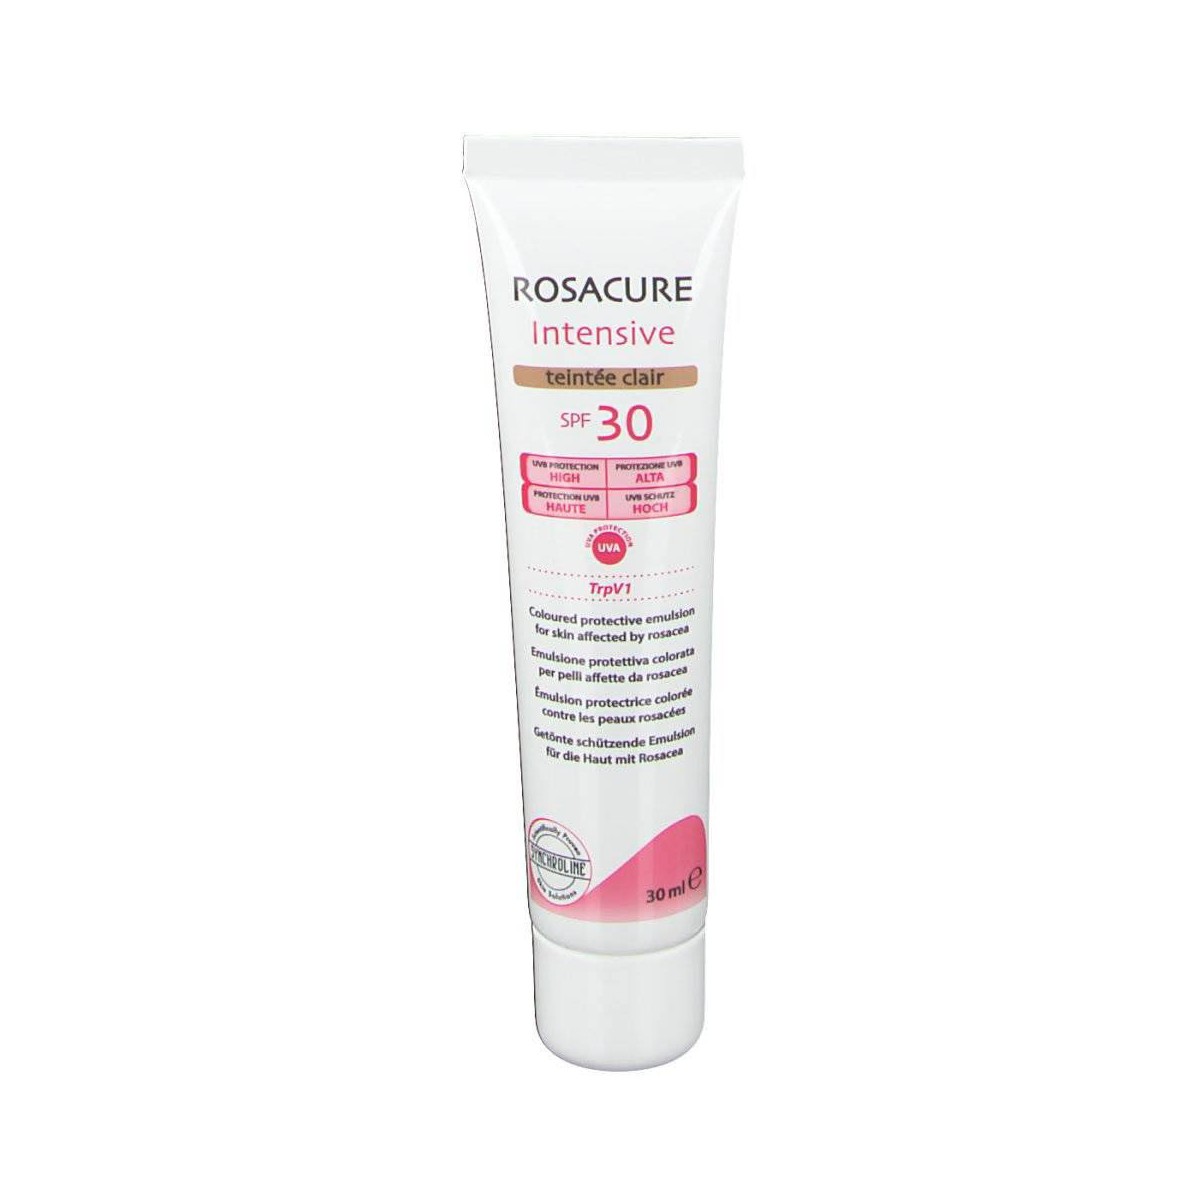 Rosacure Intensive Clair SPF30